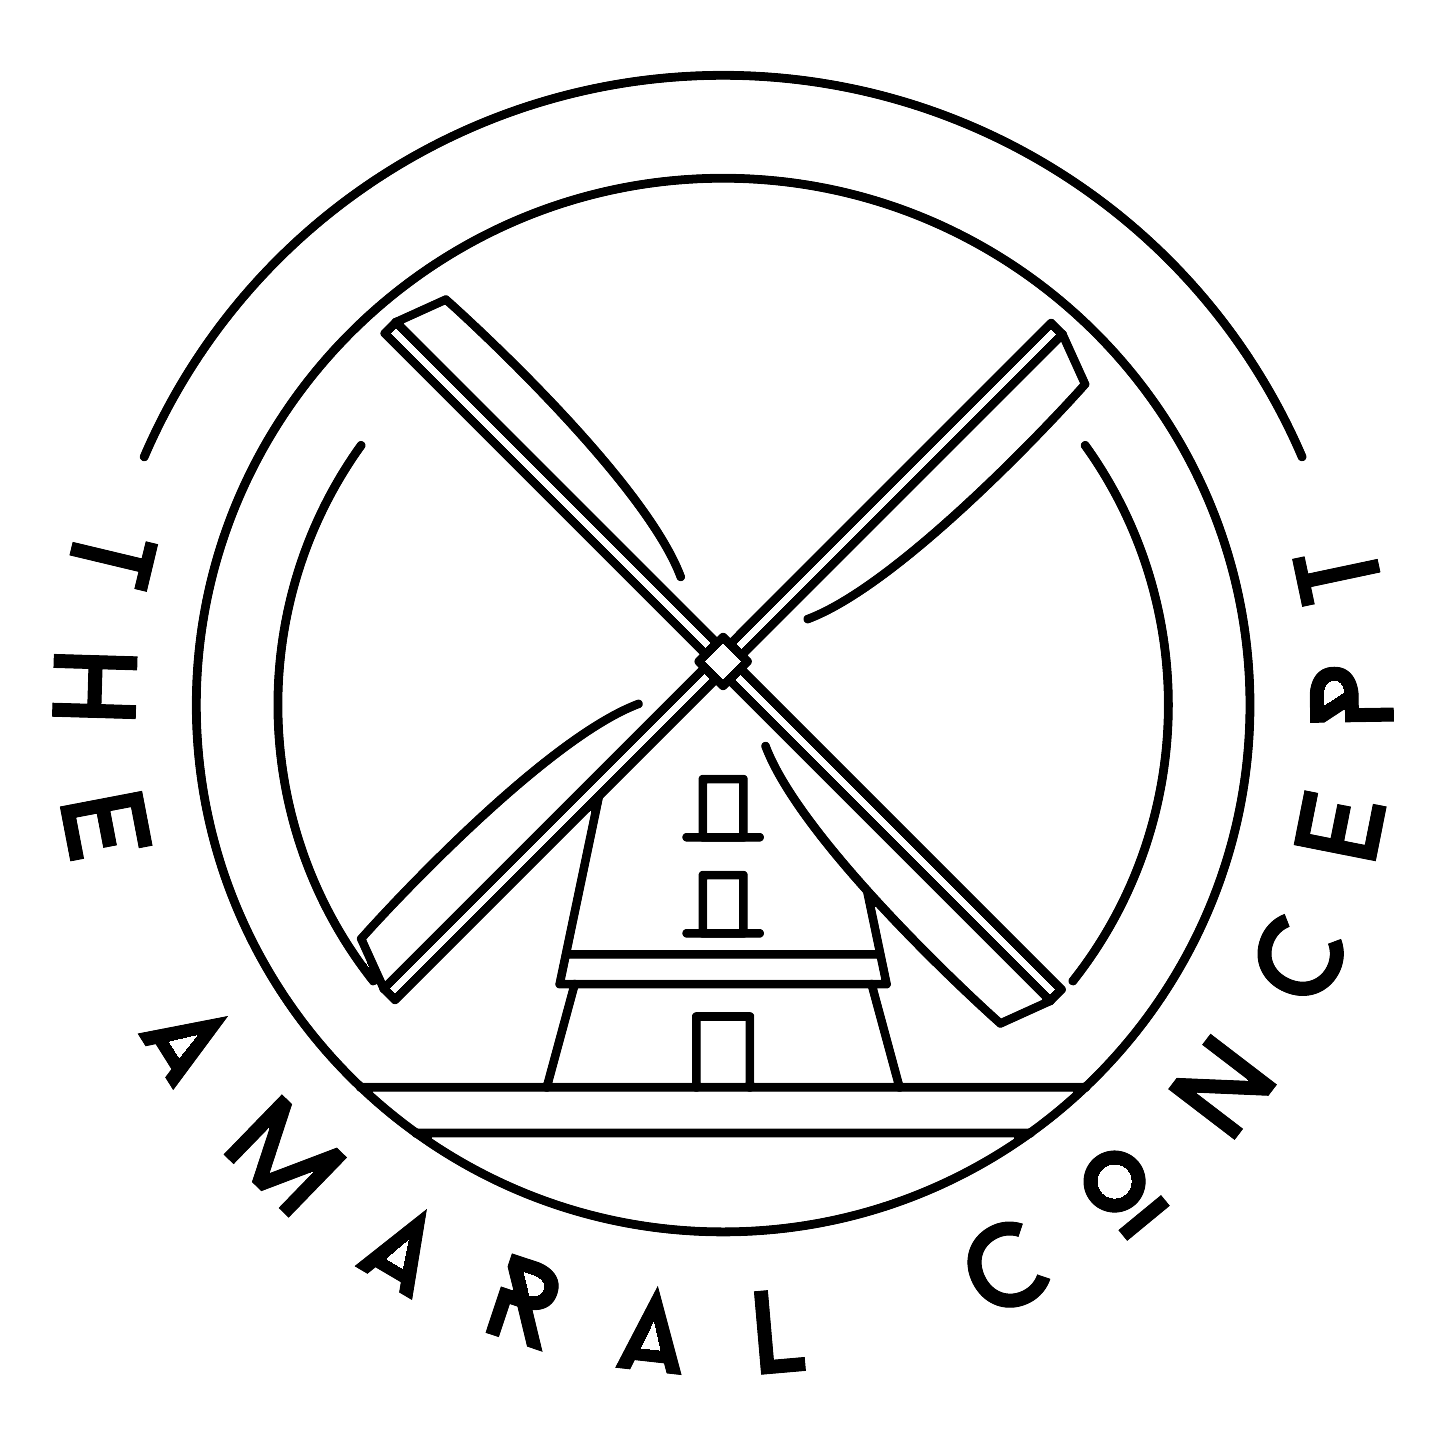 The Amaral Concept